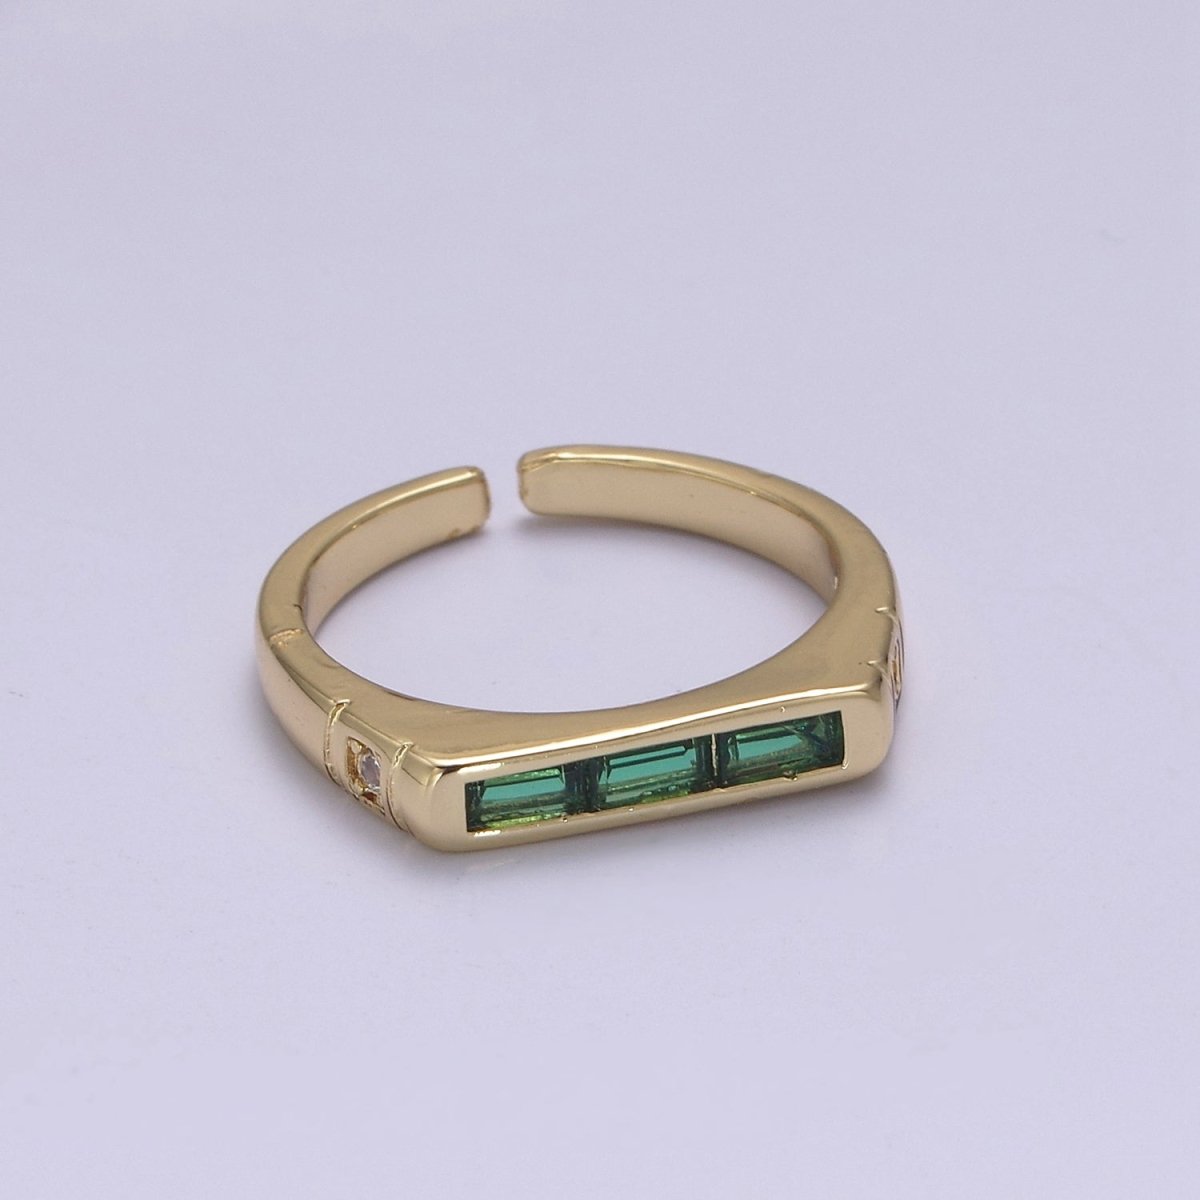 24K Gold Filled Triple Green, Clear Baguette CZ Cubic Crystal Zirconia Flat Bar Signet Adjustable Ring S-360 S-361 - DLUXCA